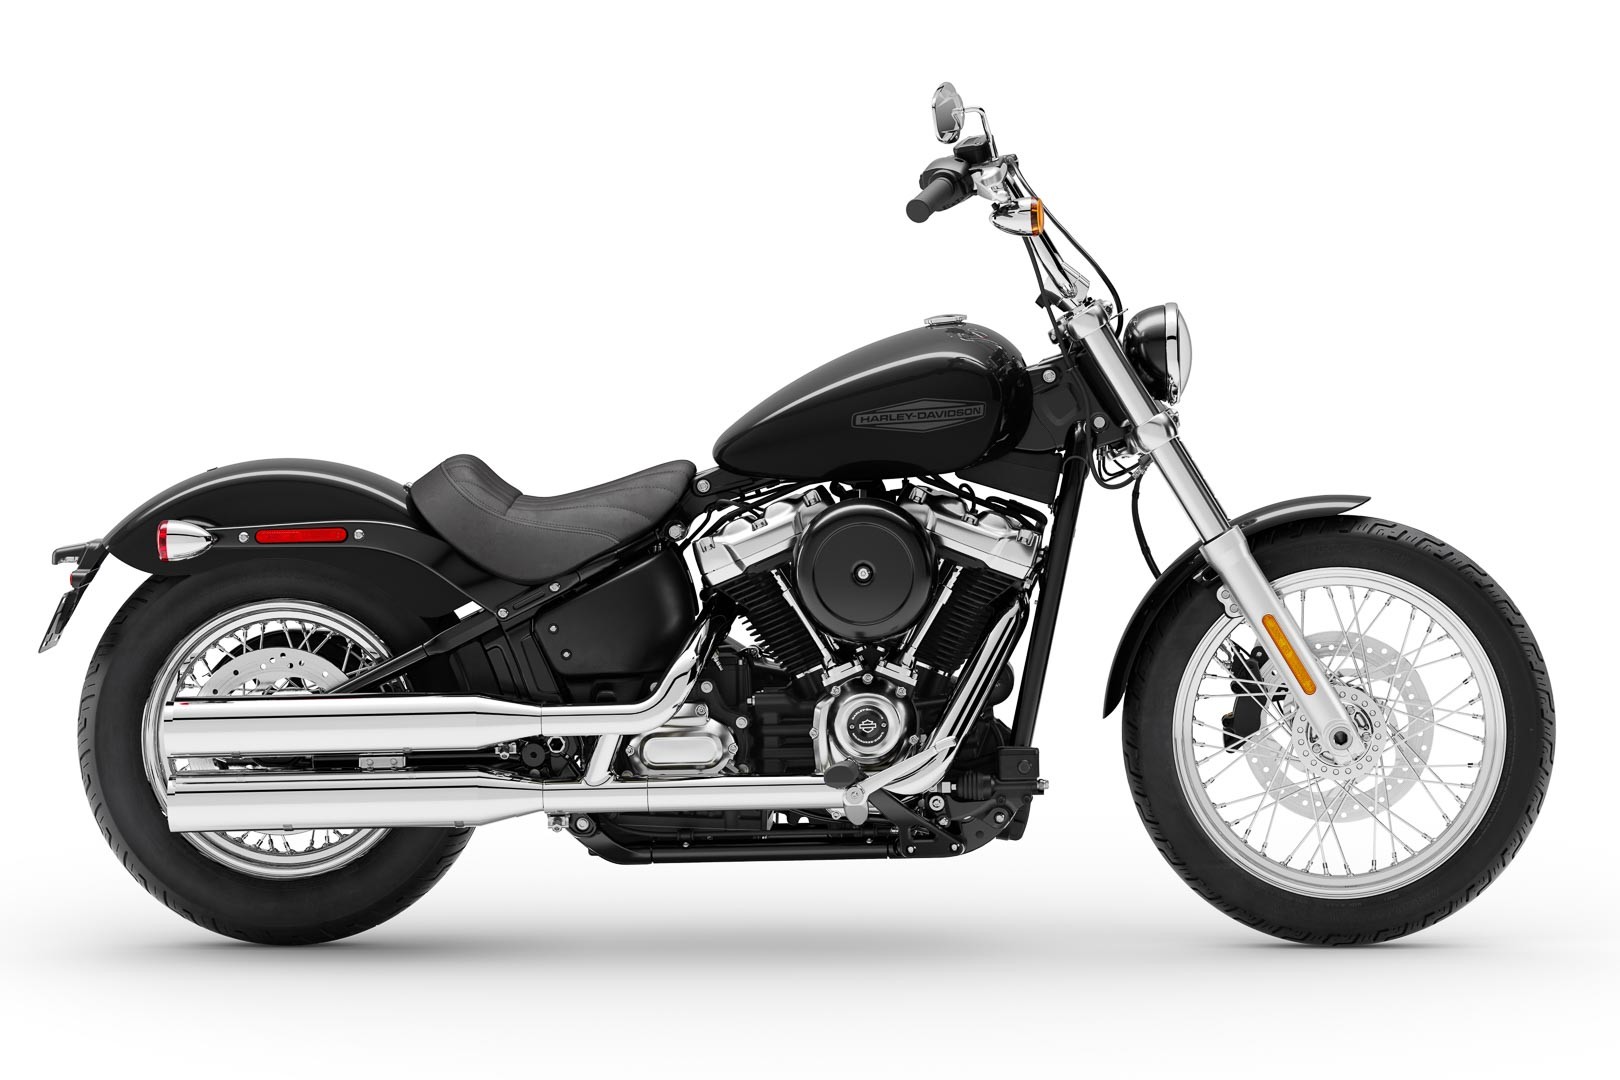 2020 Harley Davidson Softail Standard Is Just Ugly Autoevolution